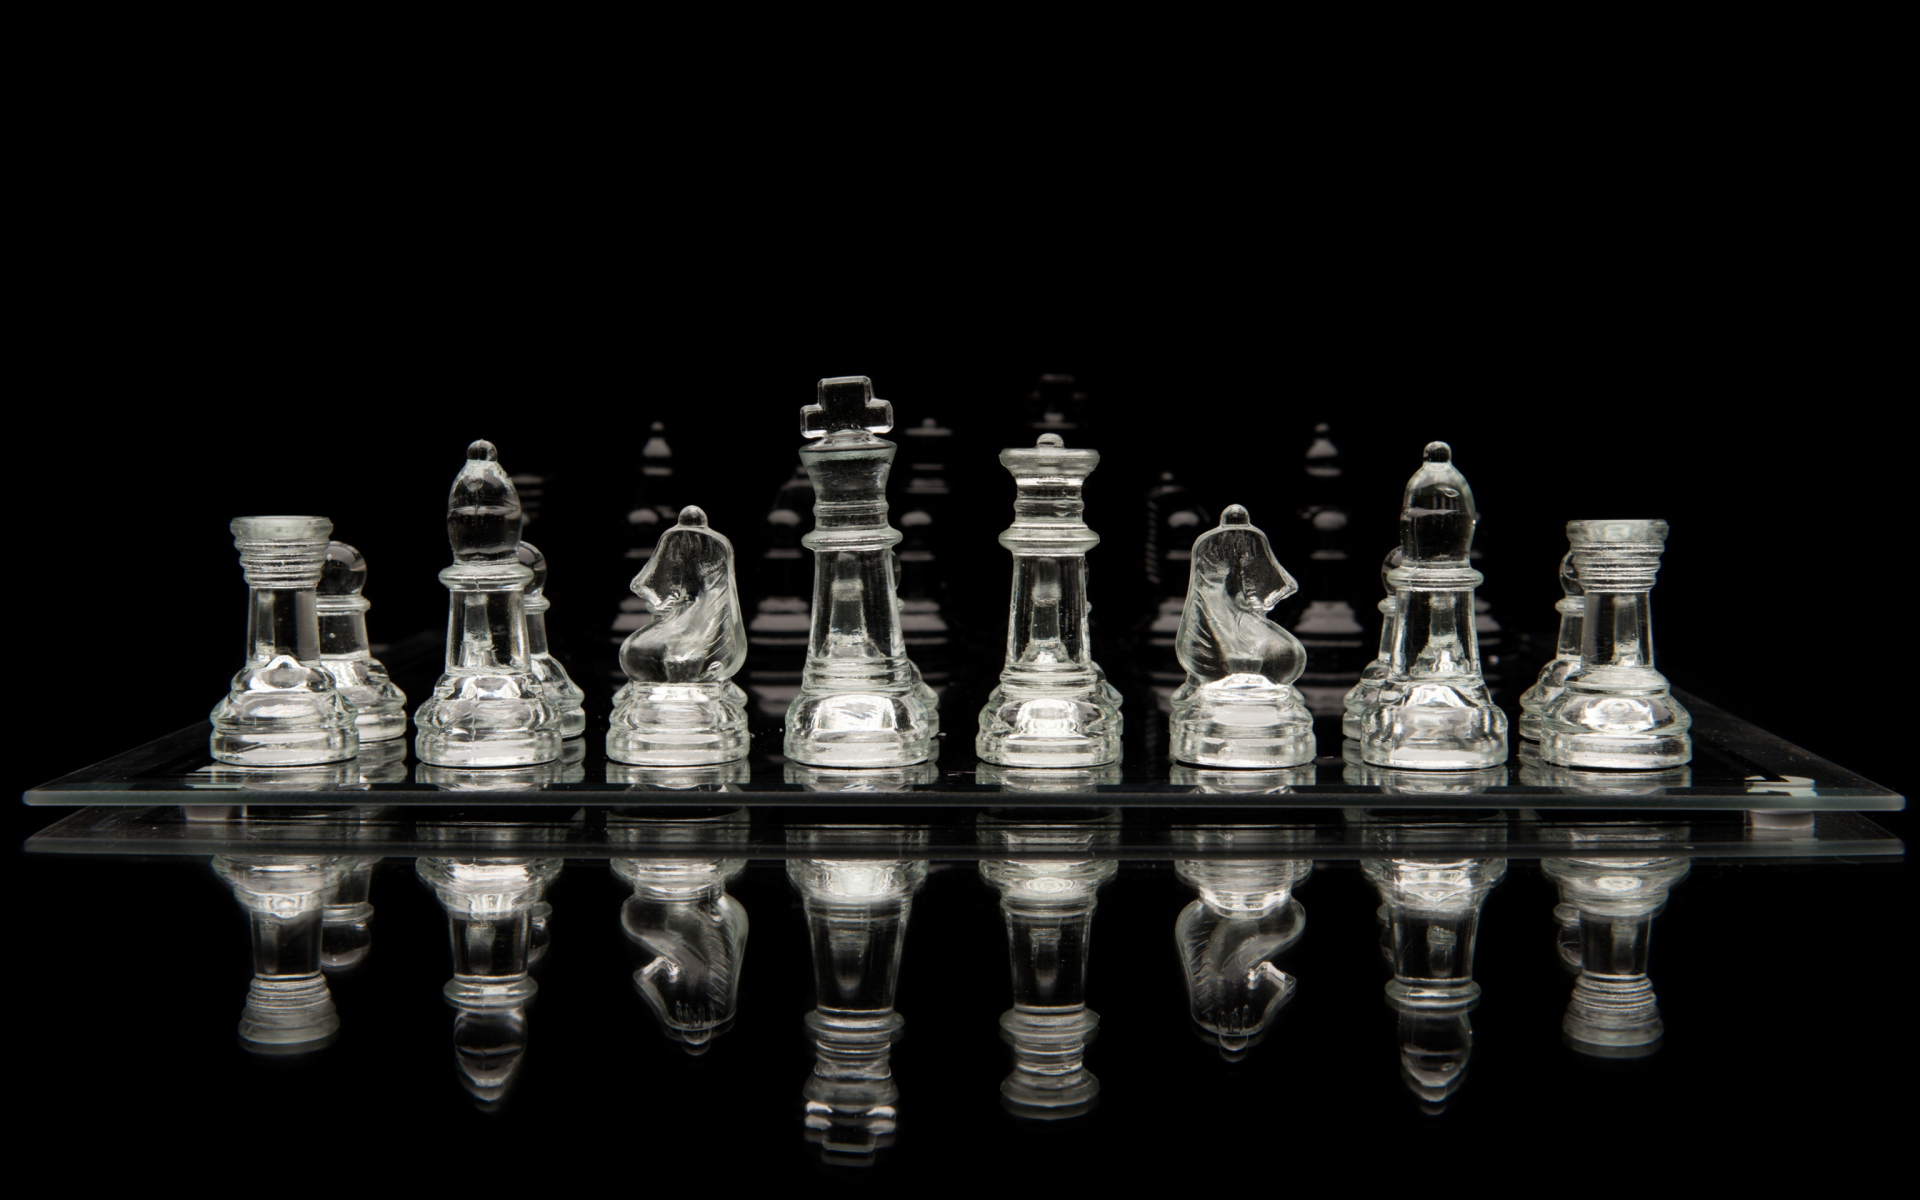 Chess full hd, hdtv, fhd, 1080p wallpapers hd, desktop backgrounds  1920x1080, images and pictures